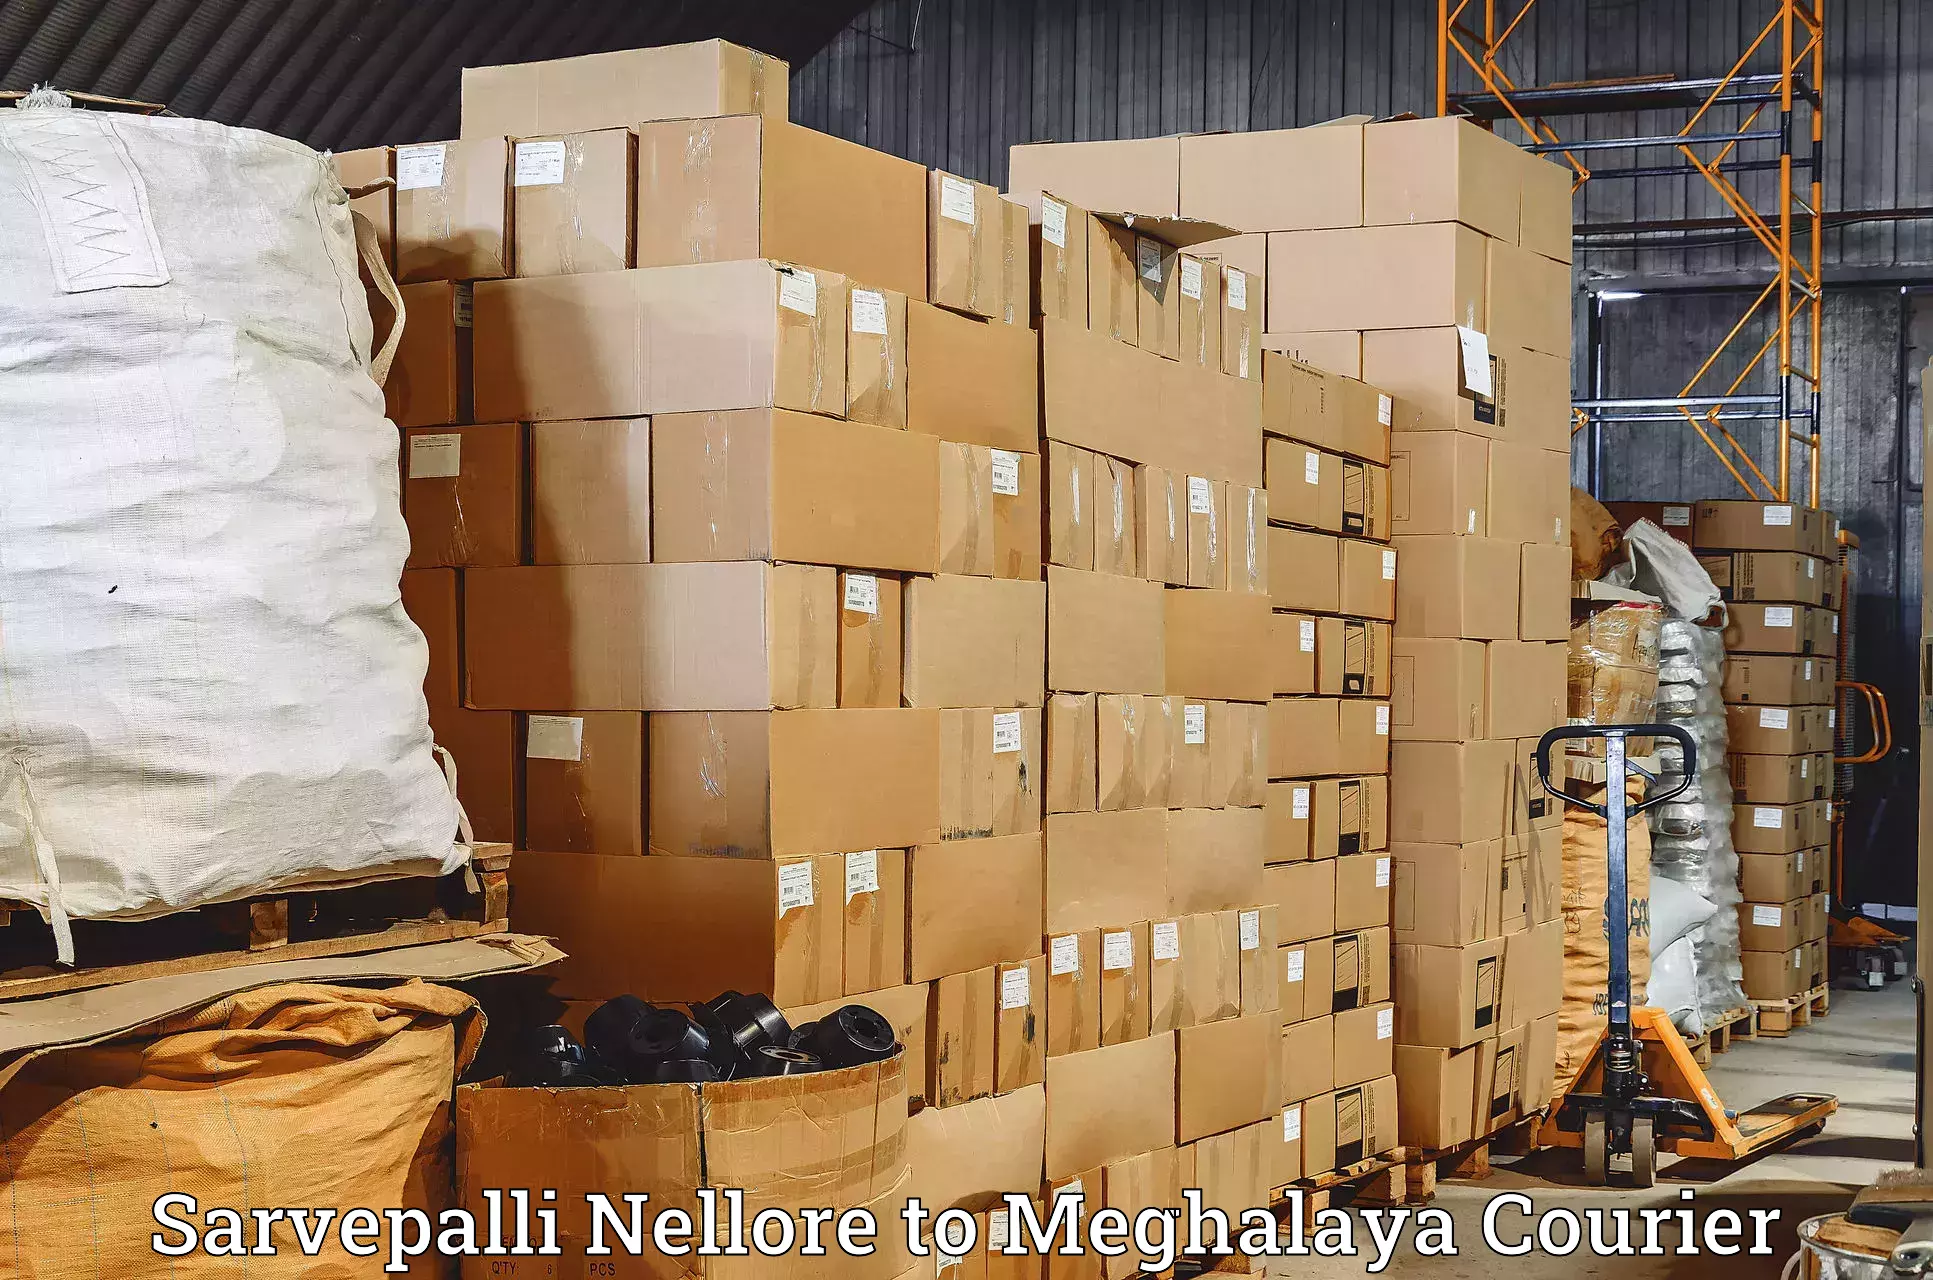 Business delivery service Sarvepalli Nellore to Meghalaya